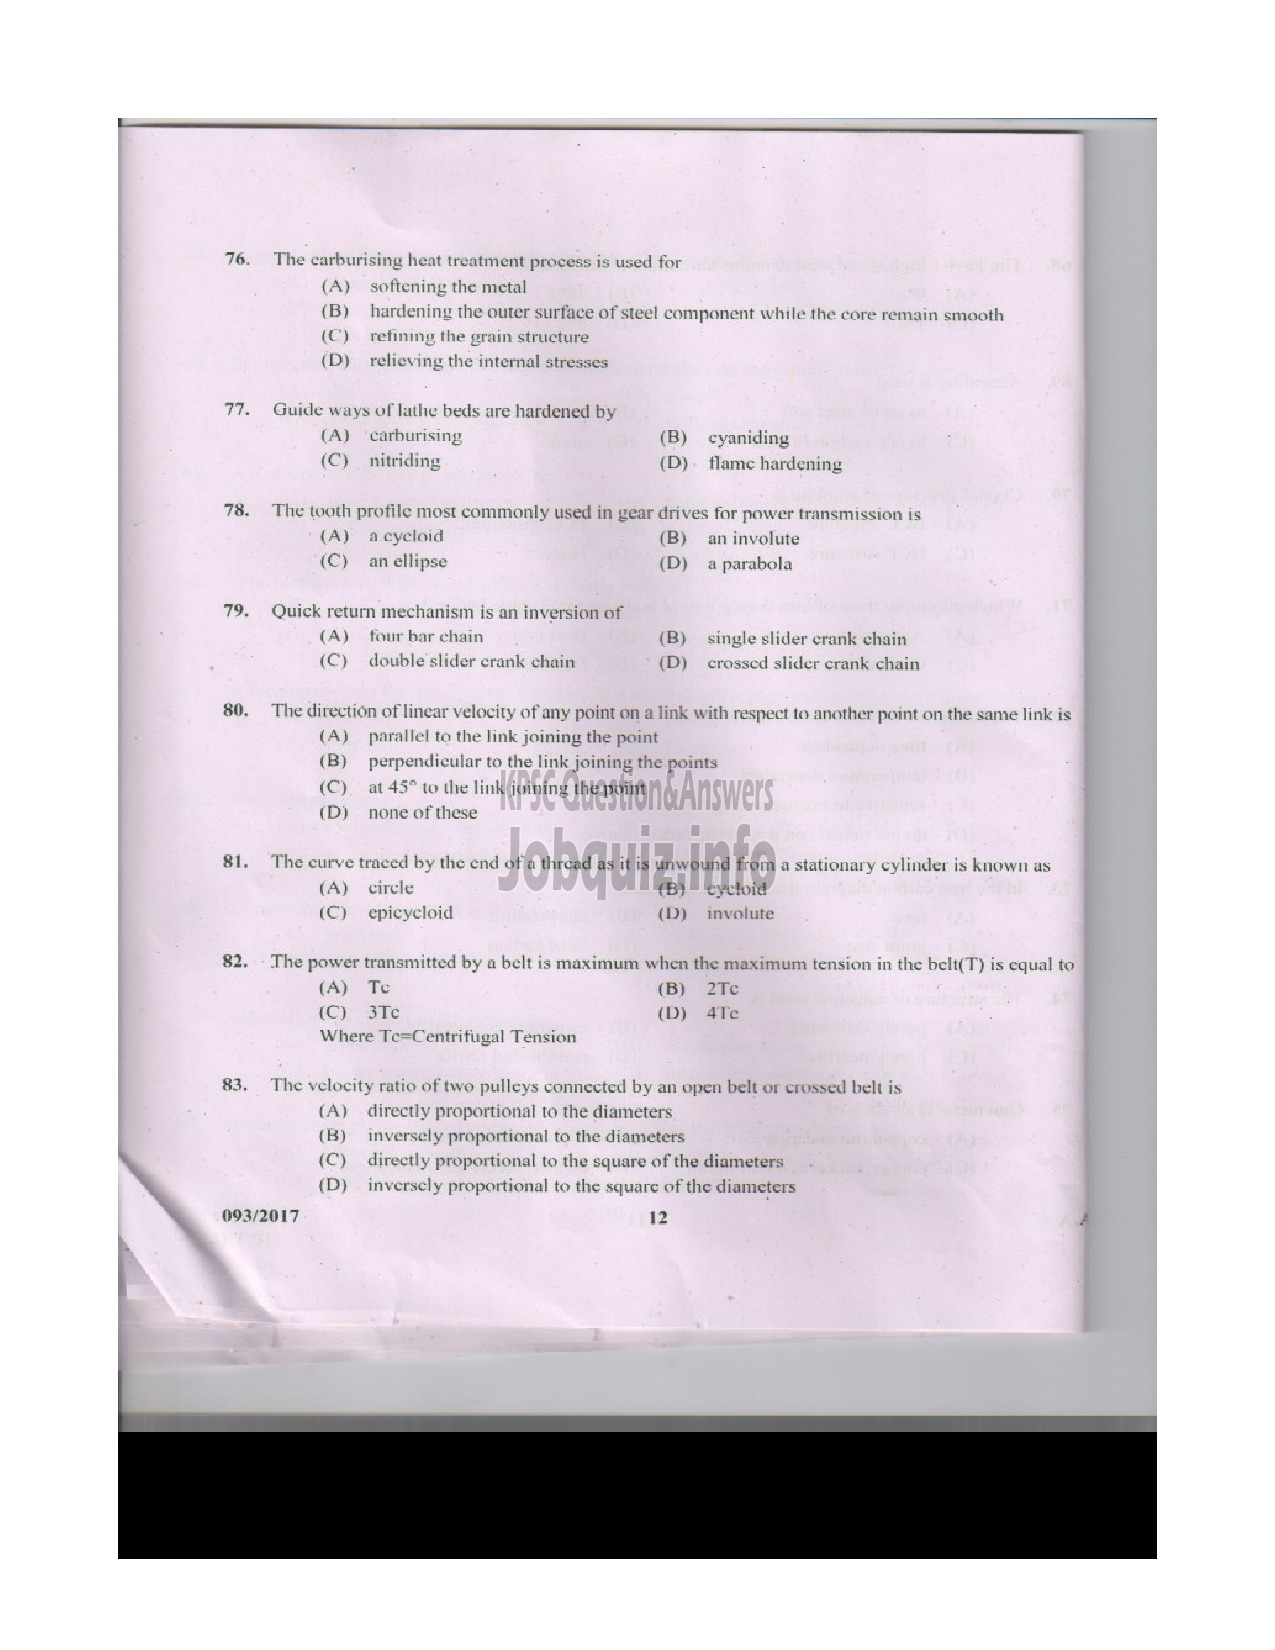 Kerala PSC Question Paper - INSTRUCTOR GRADE I MECHANICAL ENGINEERING ENGINEERING COLLEGES-11